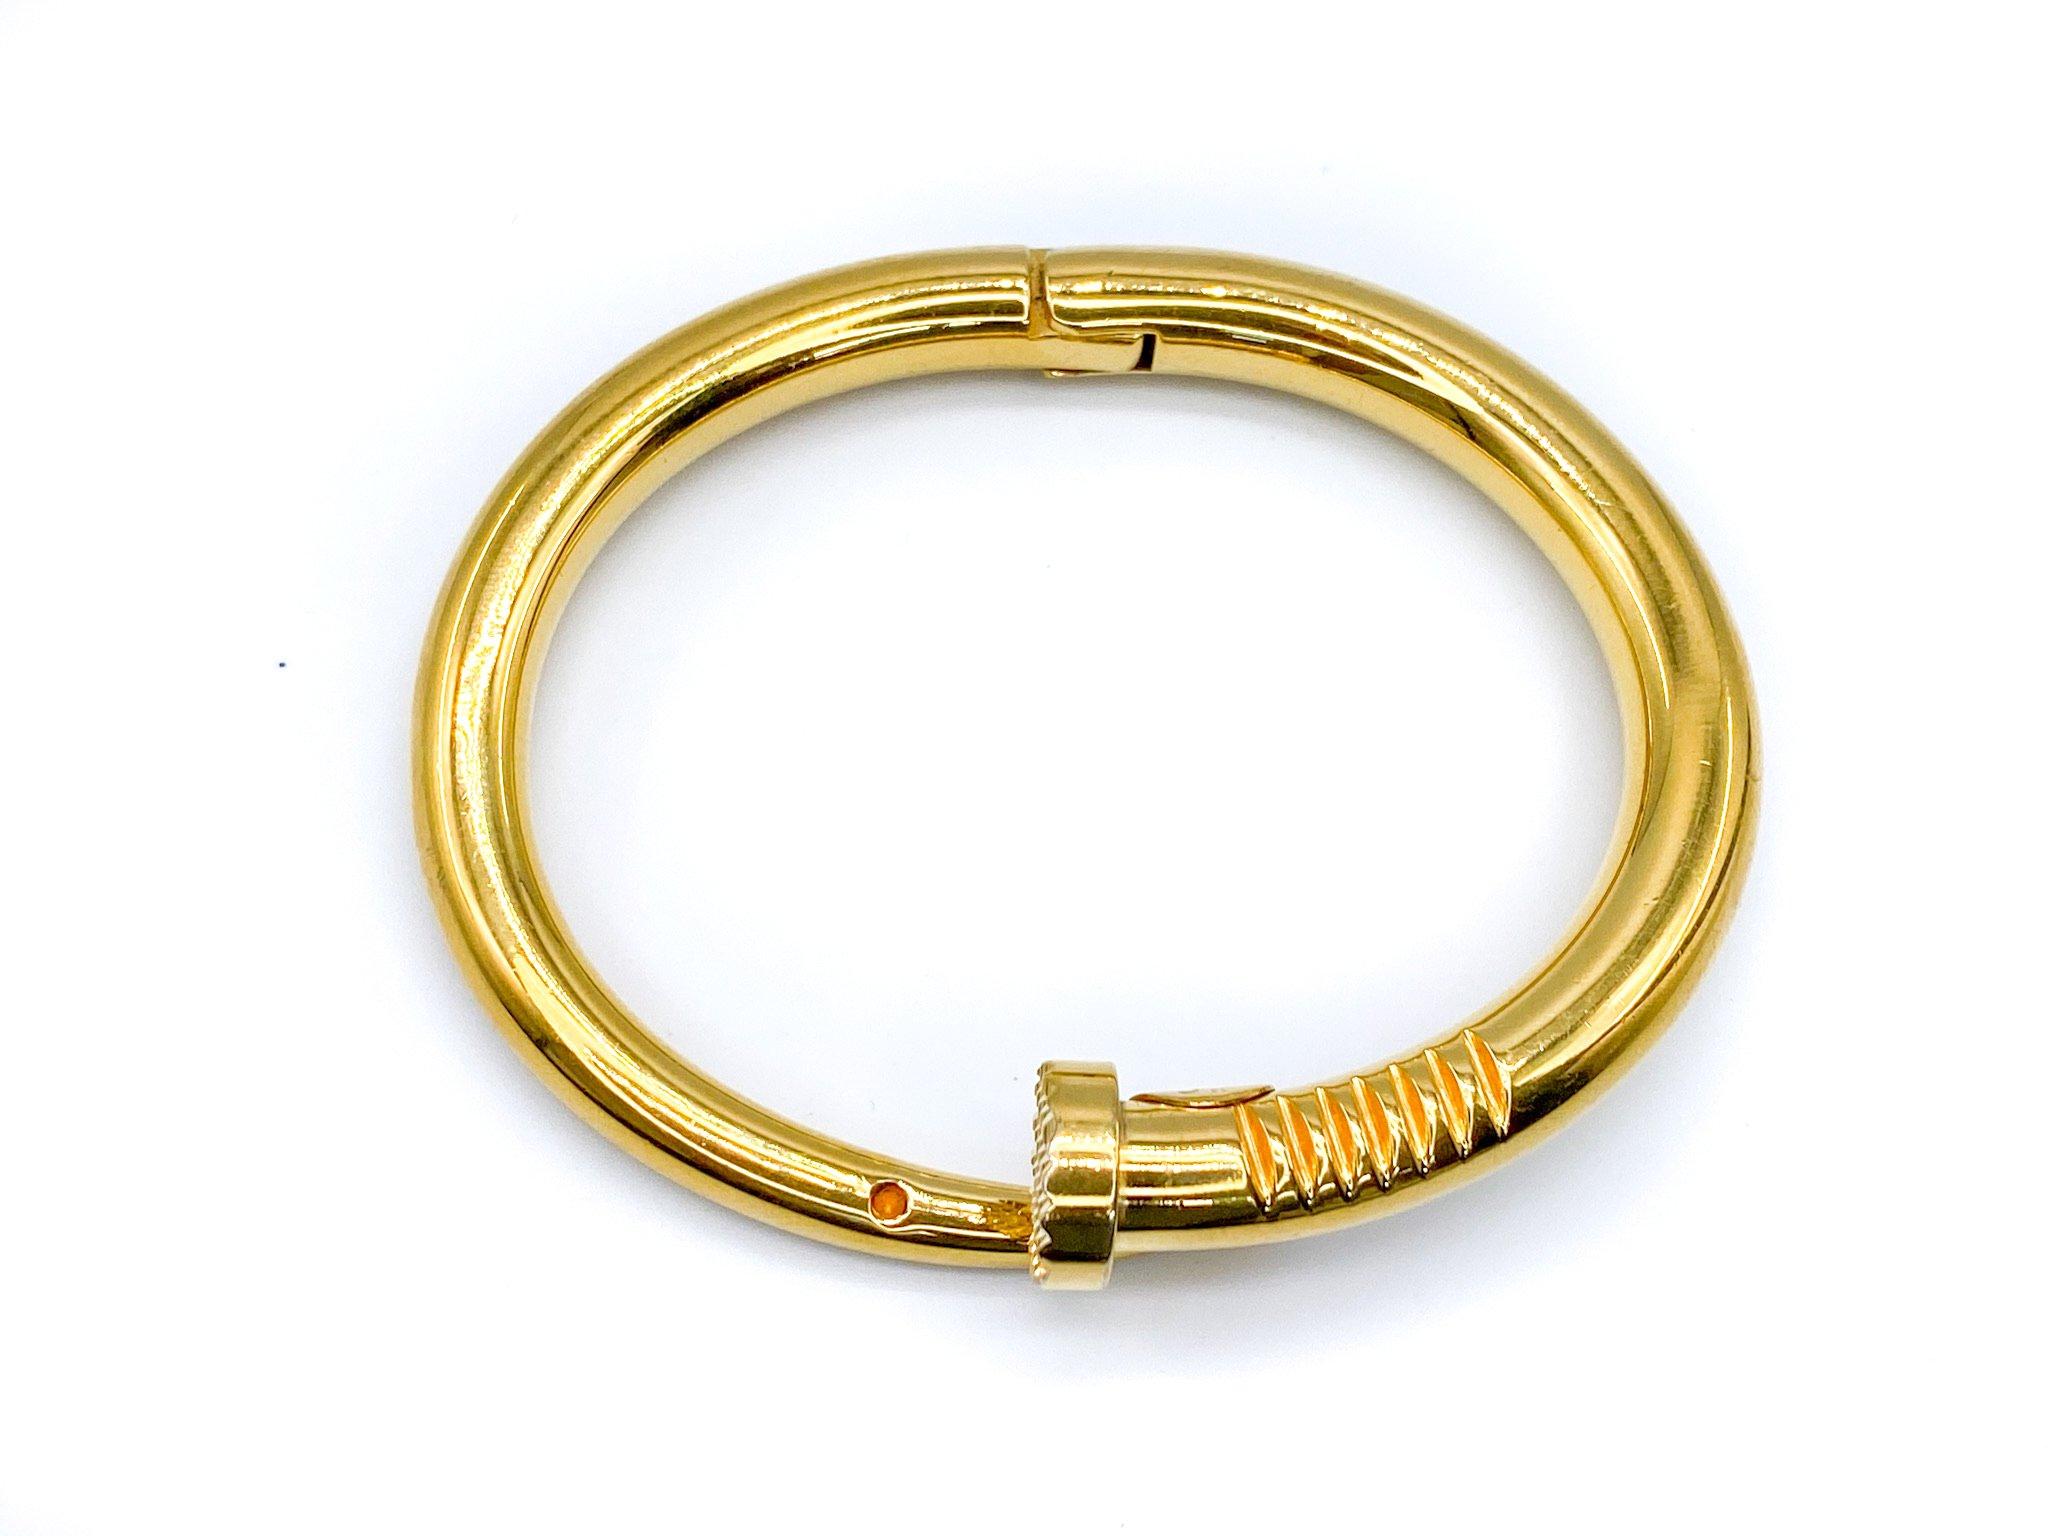 Gucci 1990s Vintage Bangle Bracelet. 

This is a timeless classic piece from the Gucci 90s archive. This is a solid piece, cast from gold plated metal. I just love vintage Gucci for it’s classic unisex appeal. 

Inner circumference measures approx 6